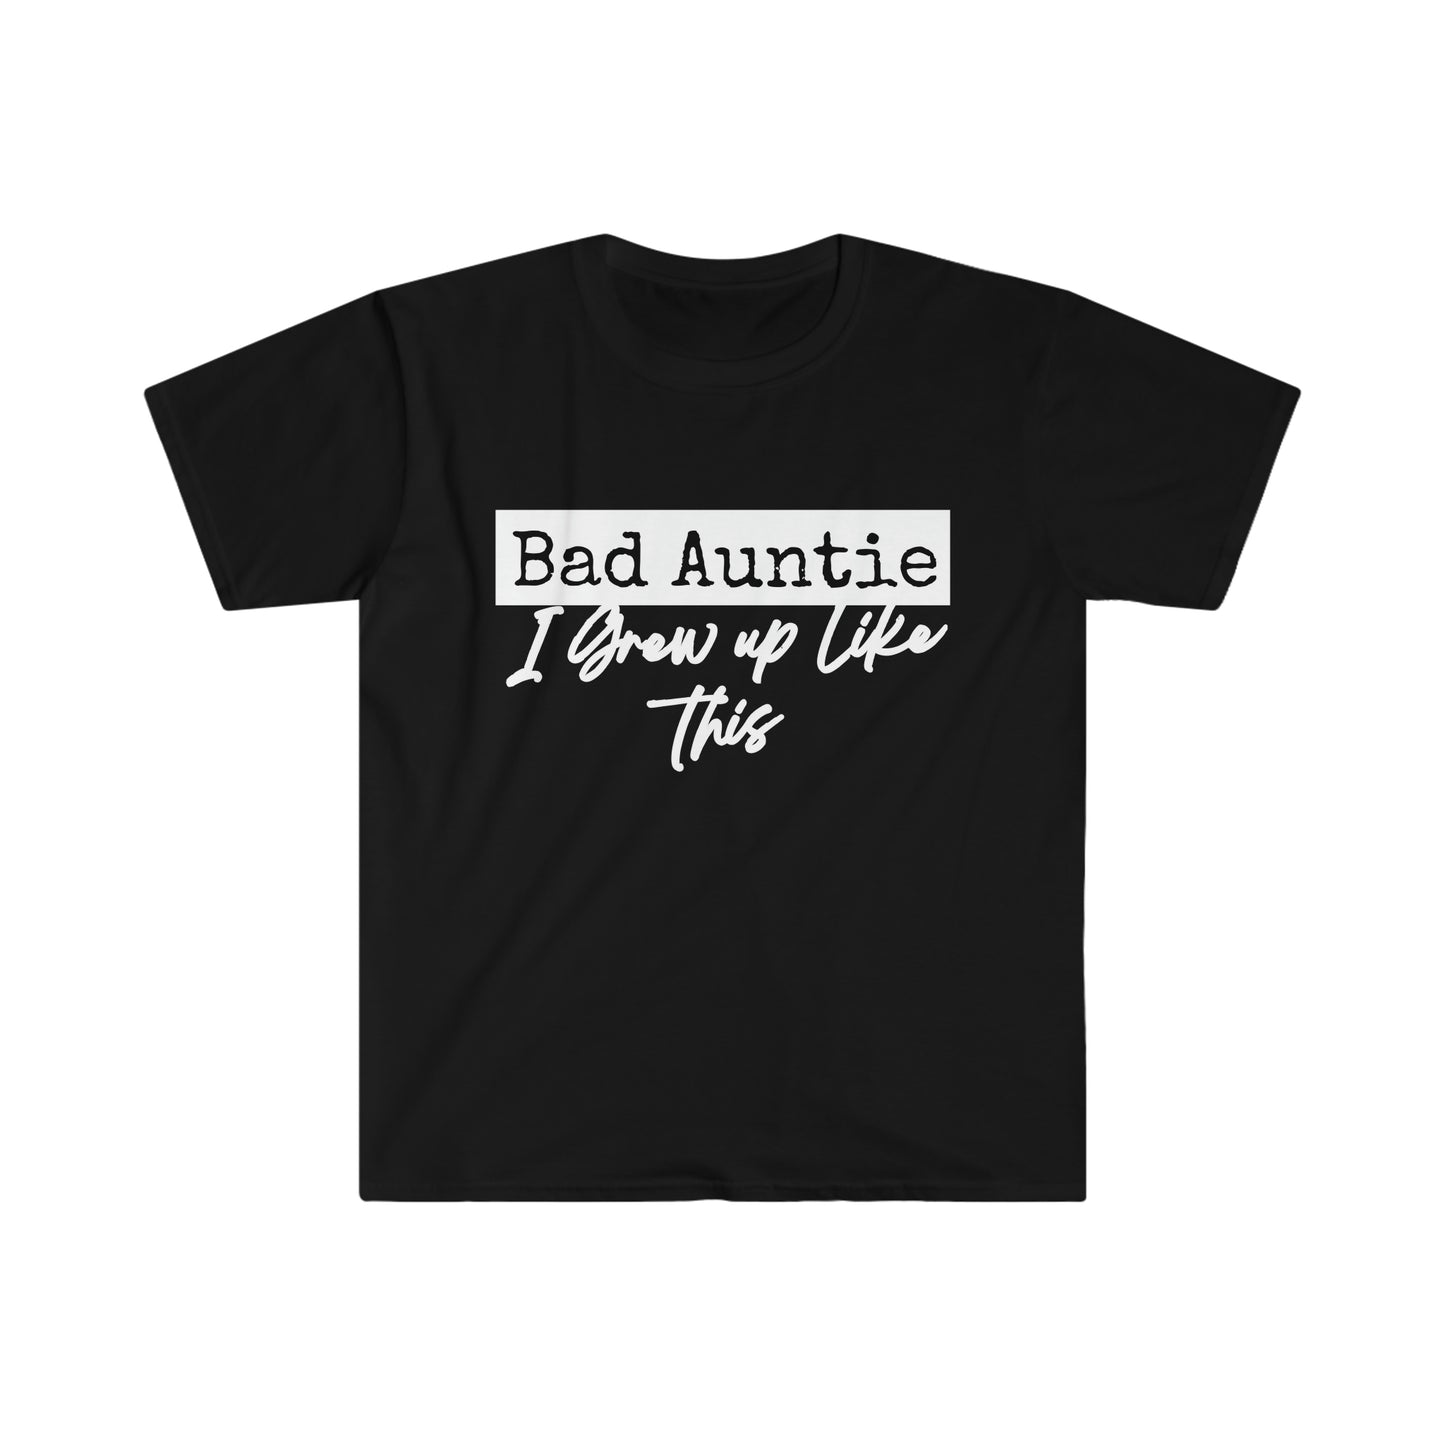 Bad Auntie T-Shirt more colors